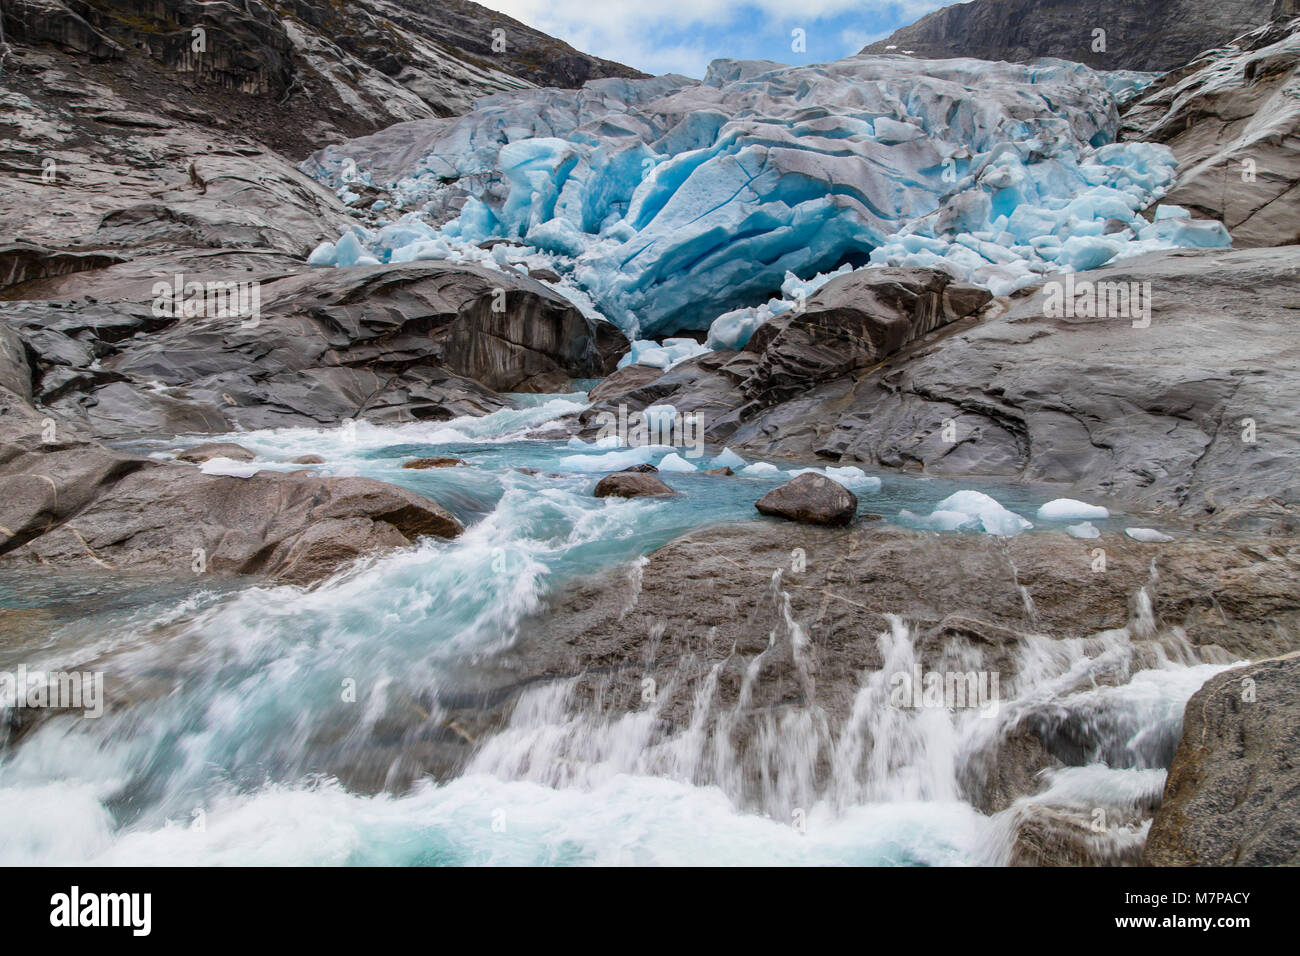 Melting of the Nigardsbreen Glacier, Jostedalsbreen National Park, Norway. Stock Photo